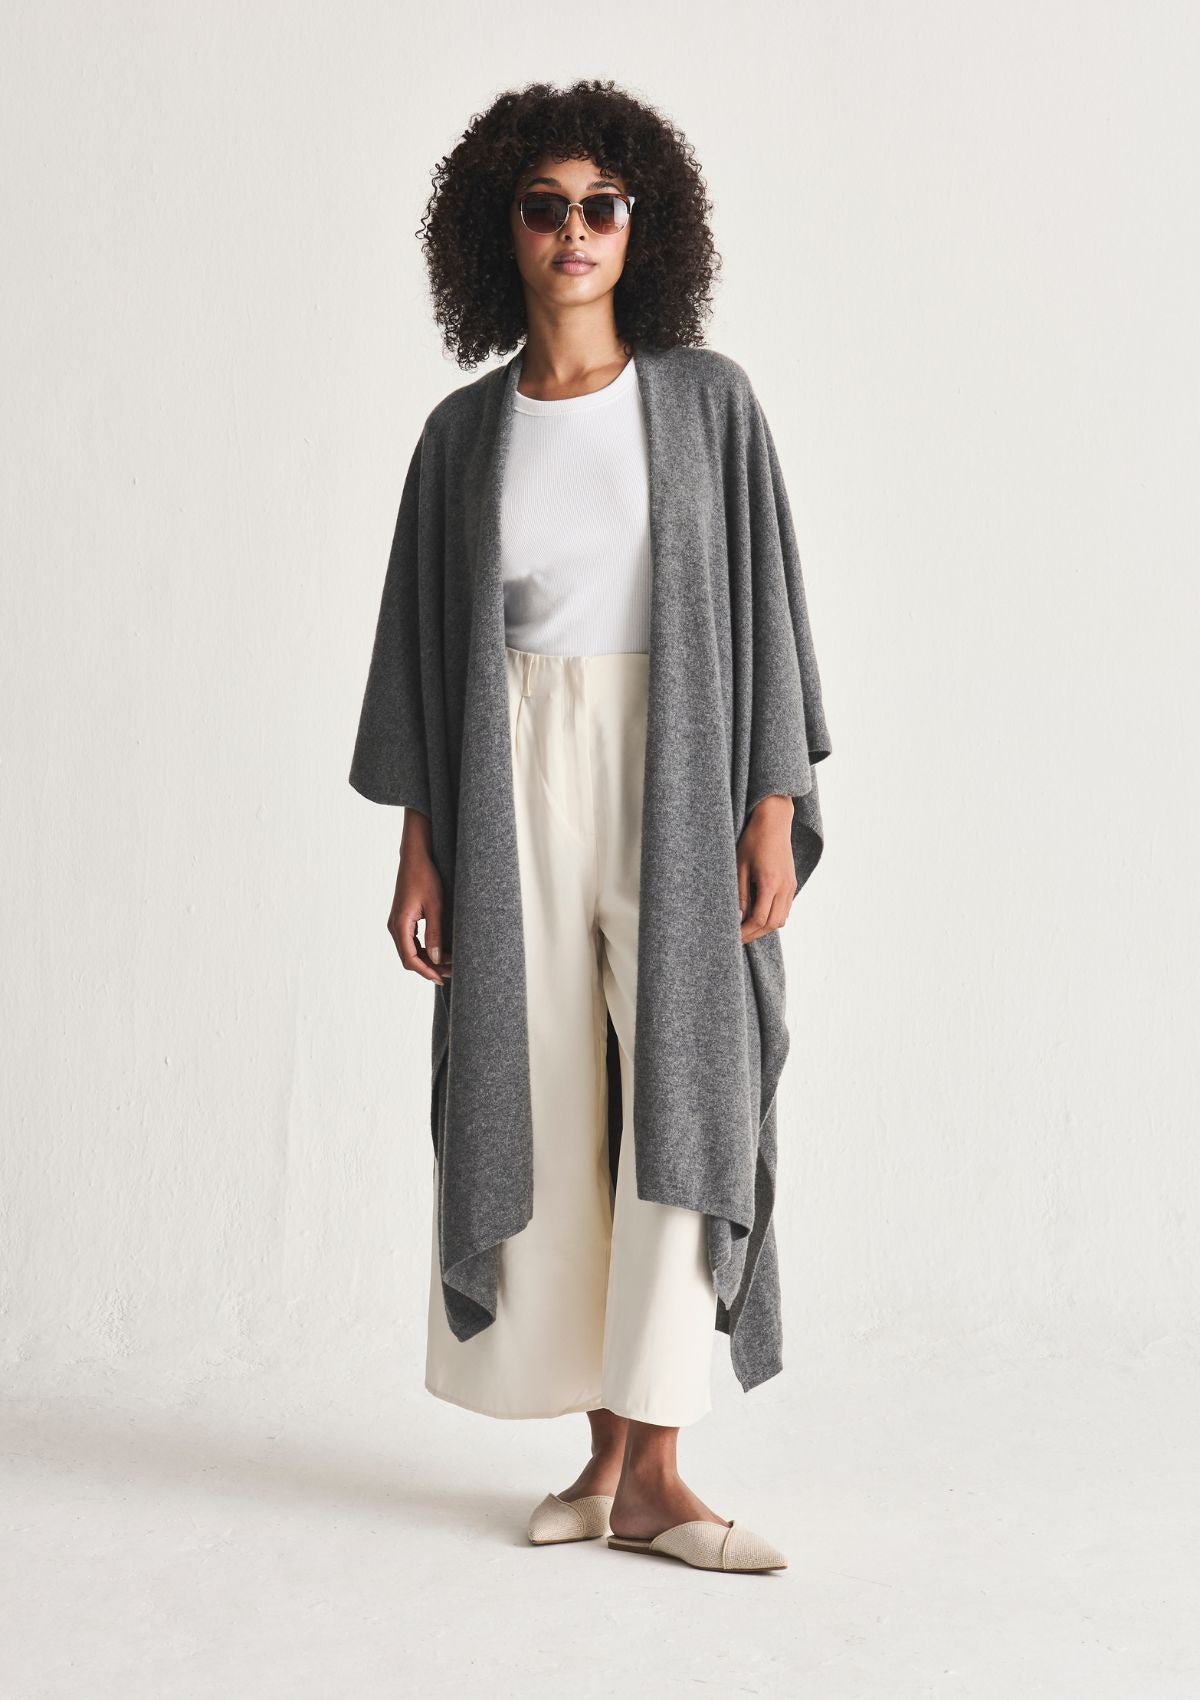 Oversized Cashmere Cape in Pewter Grey